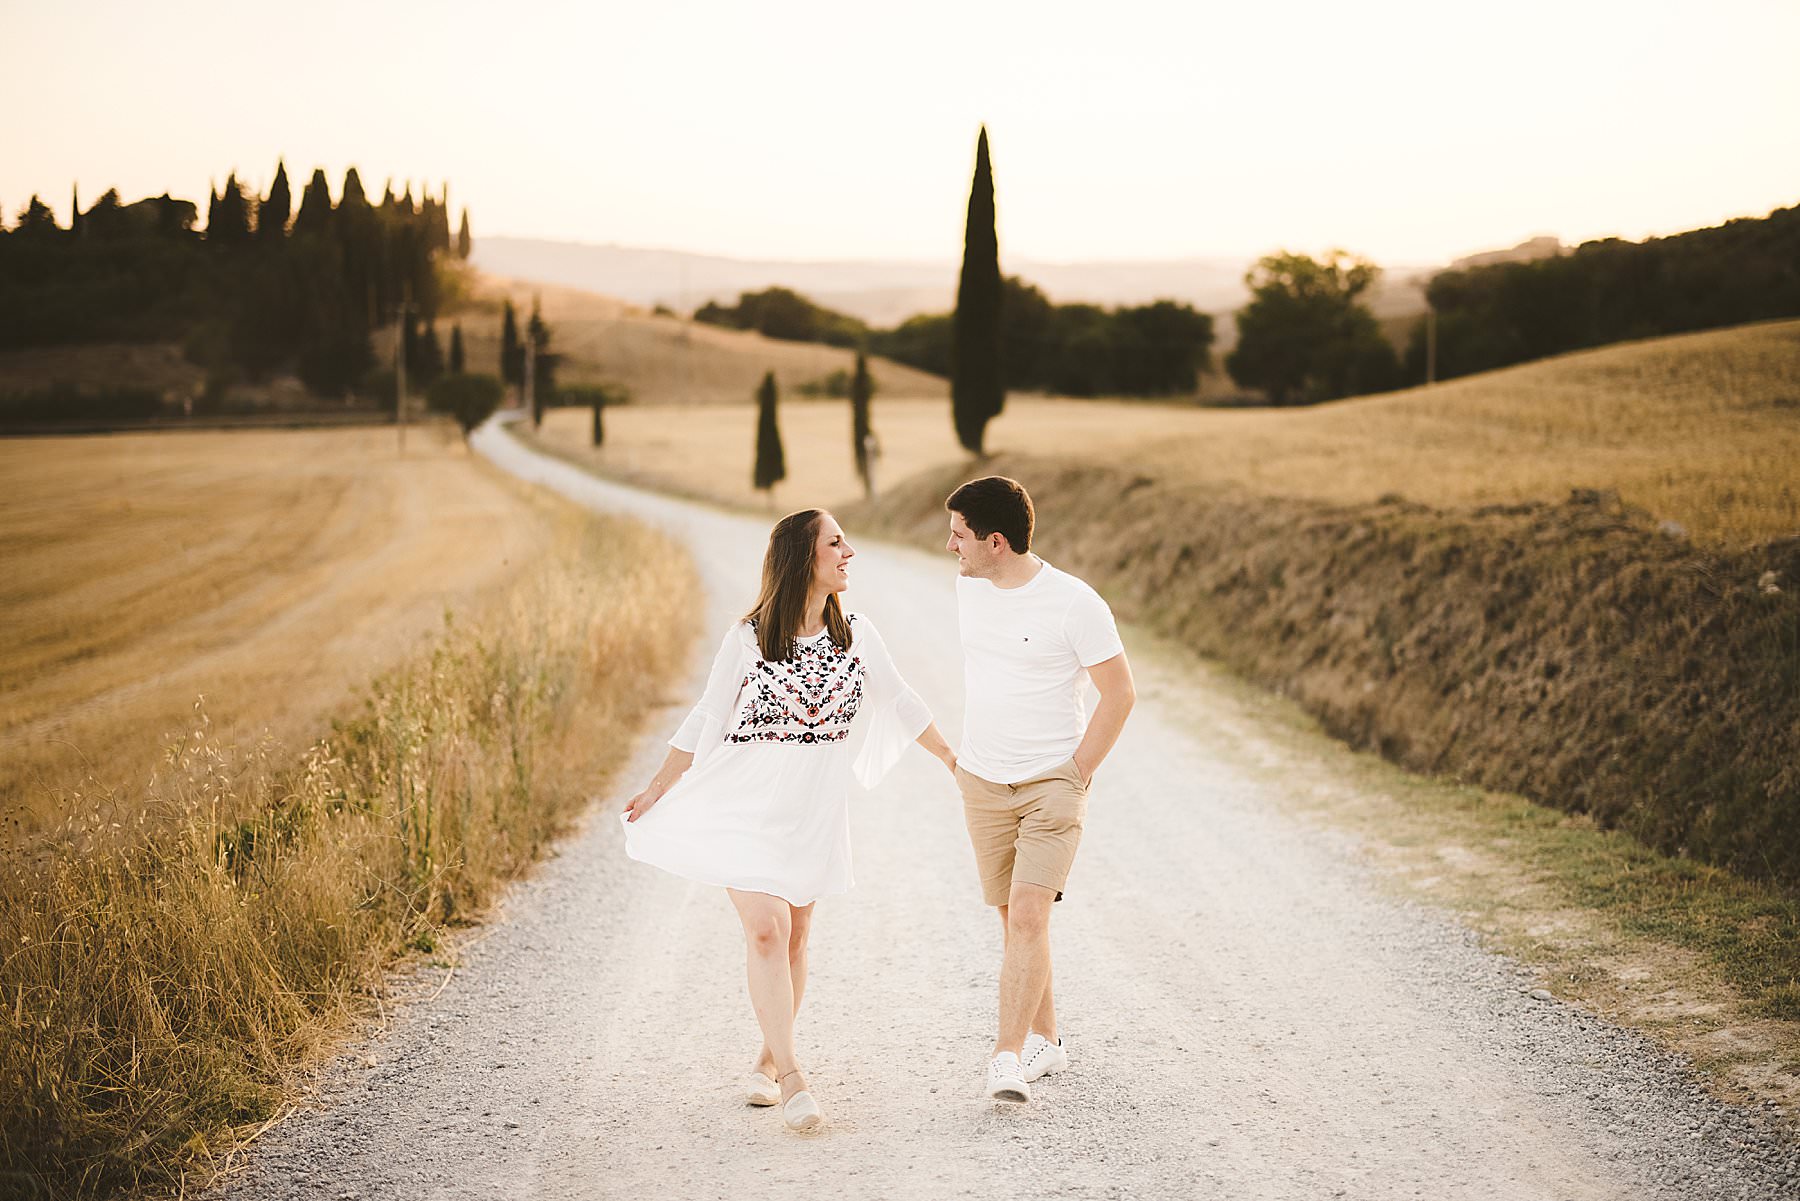 Romantic couple photoshoot in the scenic countryside of Tuscany